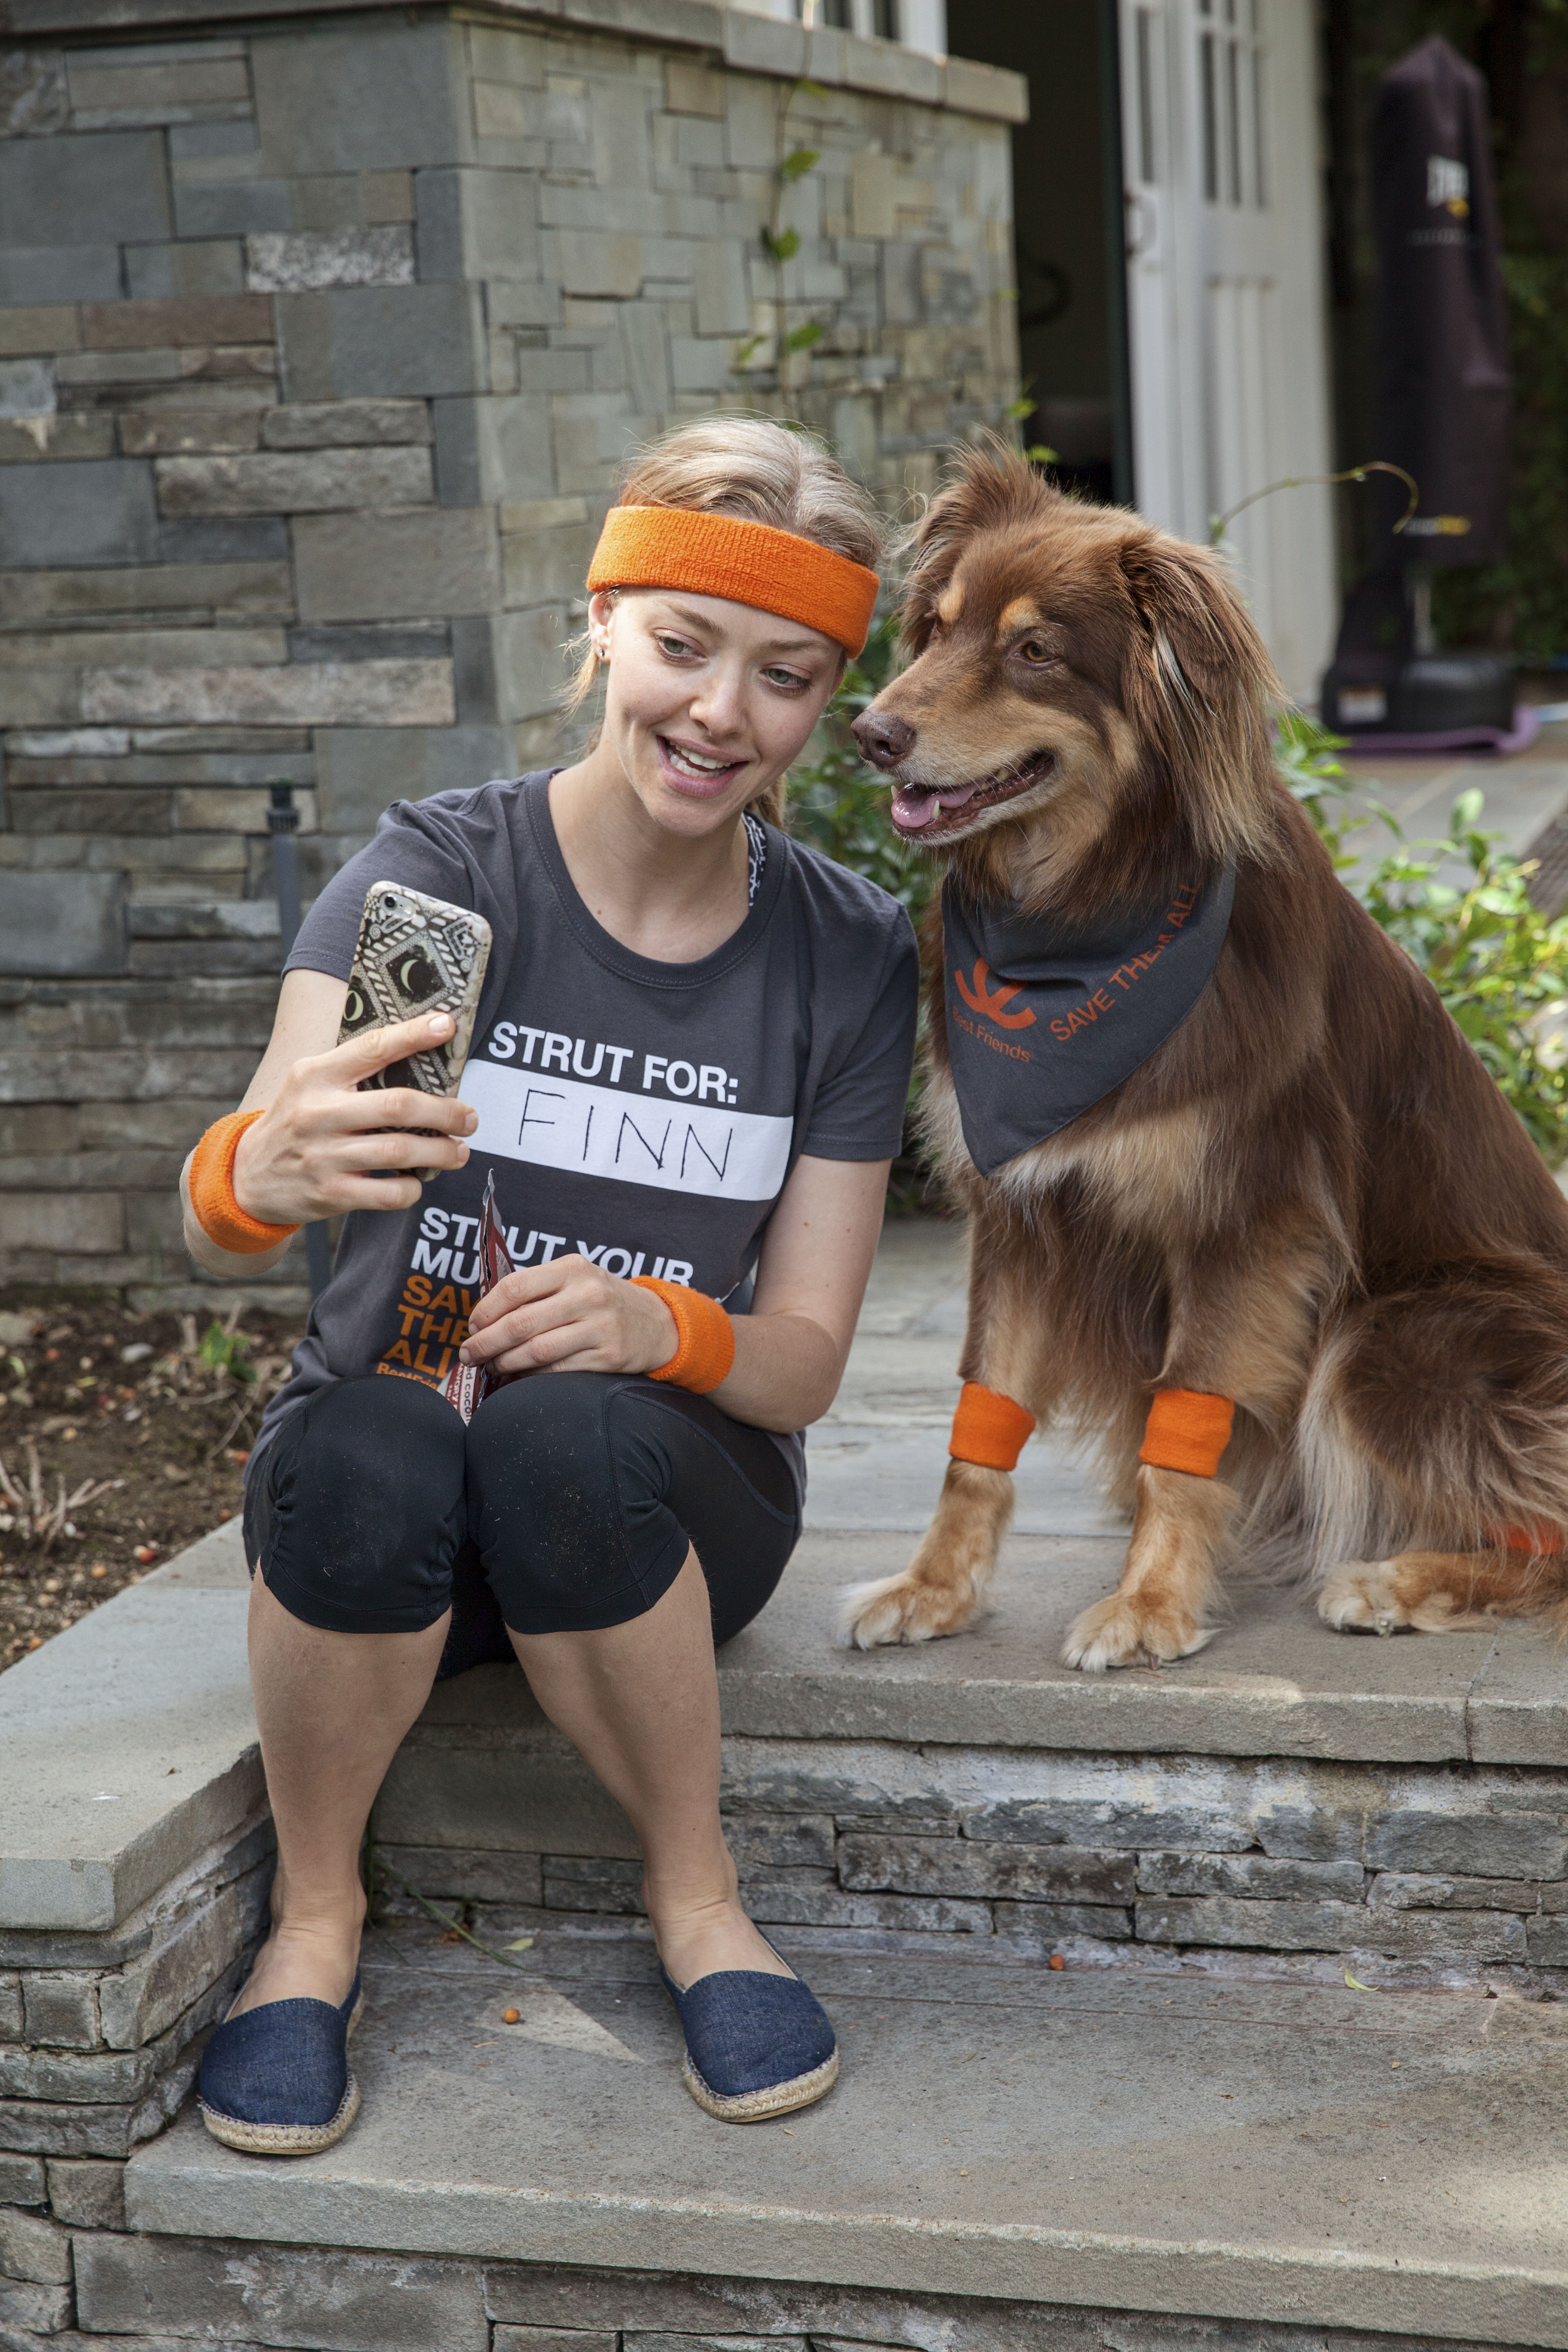 Amanda Seyfried and her dog Finn are the national spokesperson and spokesdog for Best Friends Animal Society’s Strut Your Mutt presented by BOBS from Skechers national fundraising walks.